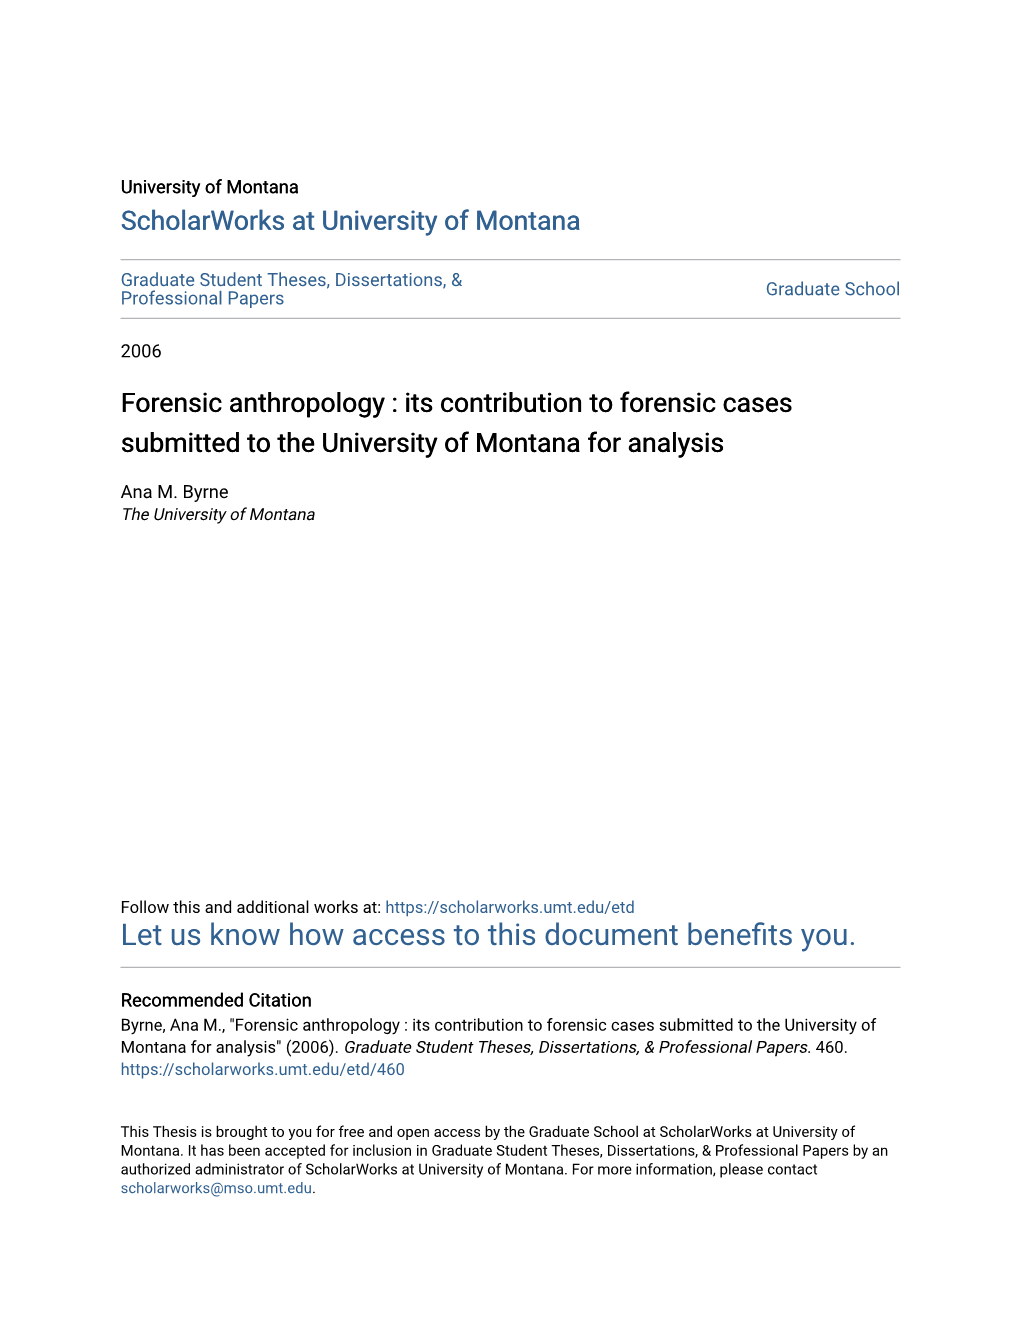 Forensic Anthropology : Its Contribution to Forensic Cases Submitted to the University of Montana for Analysis